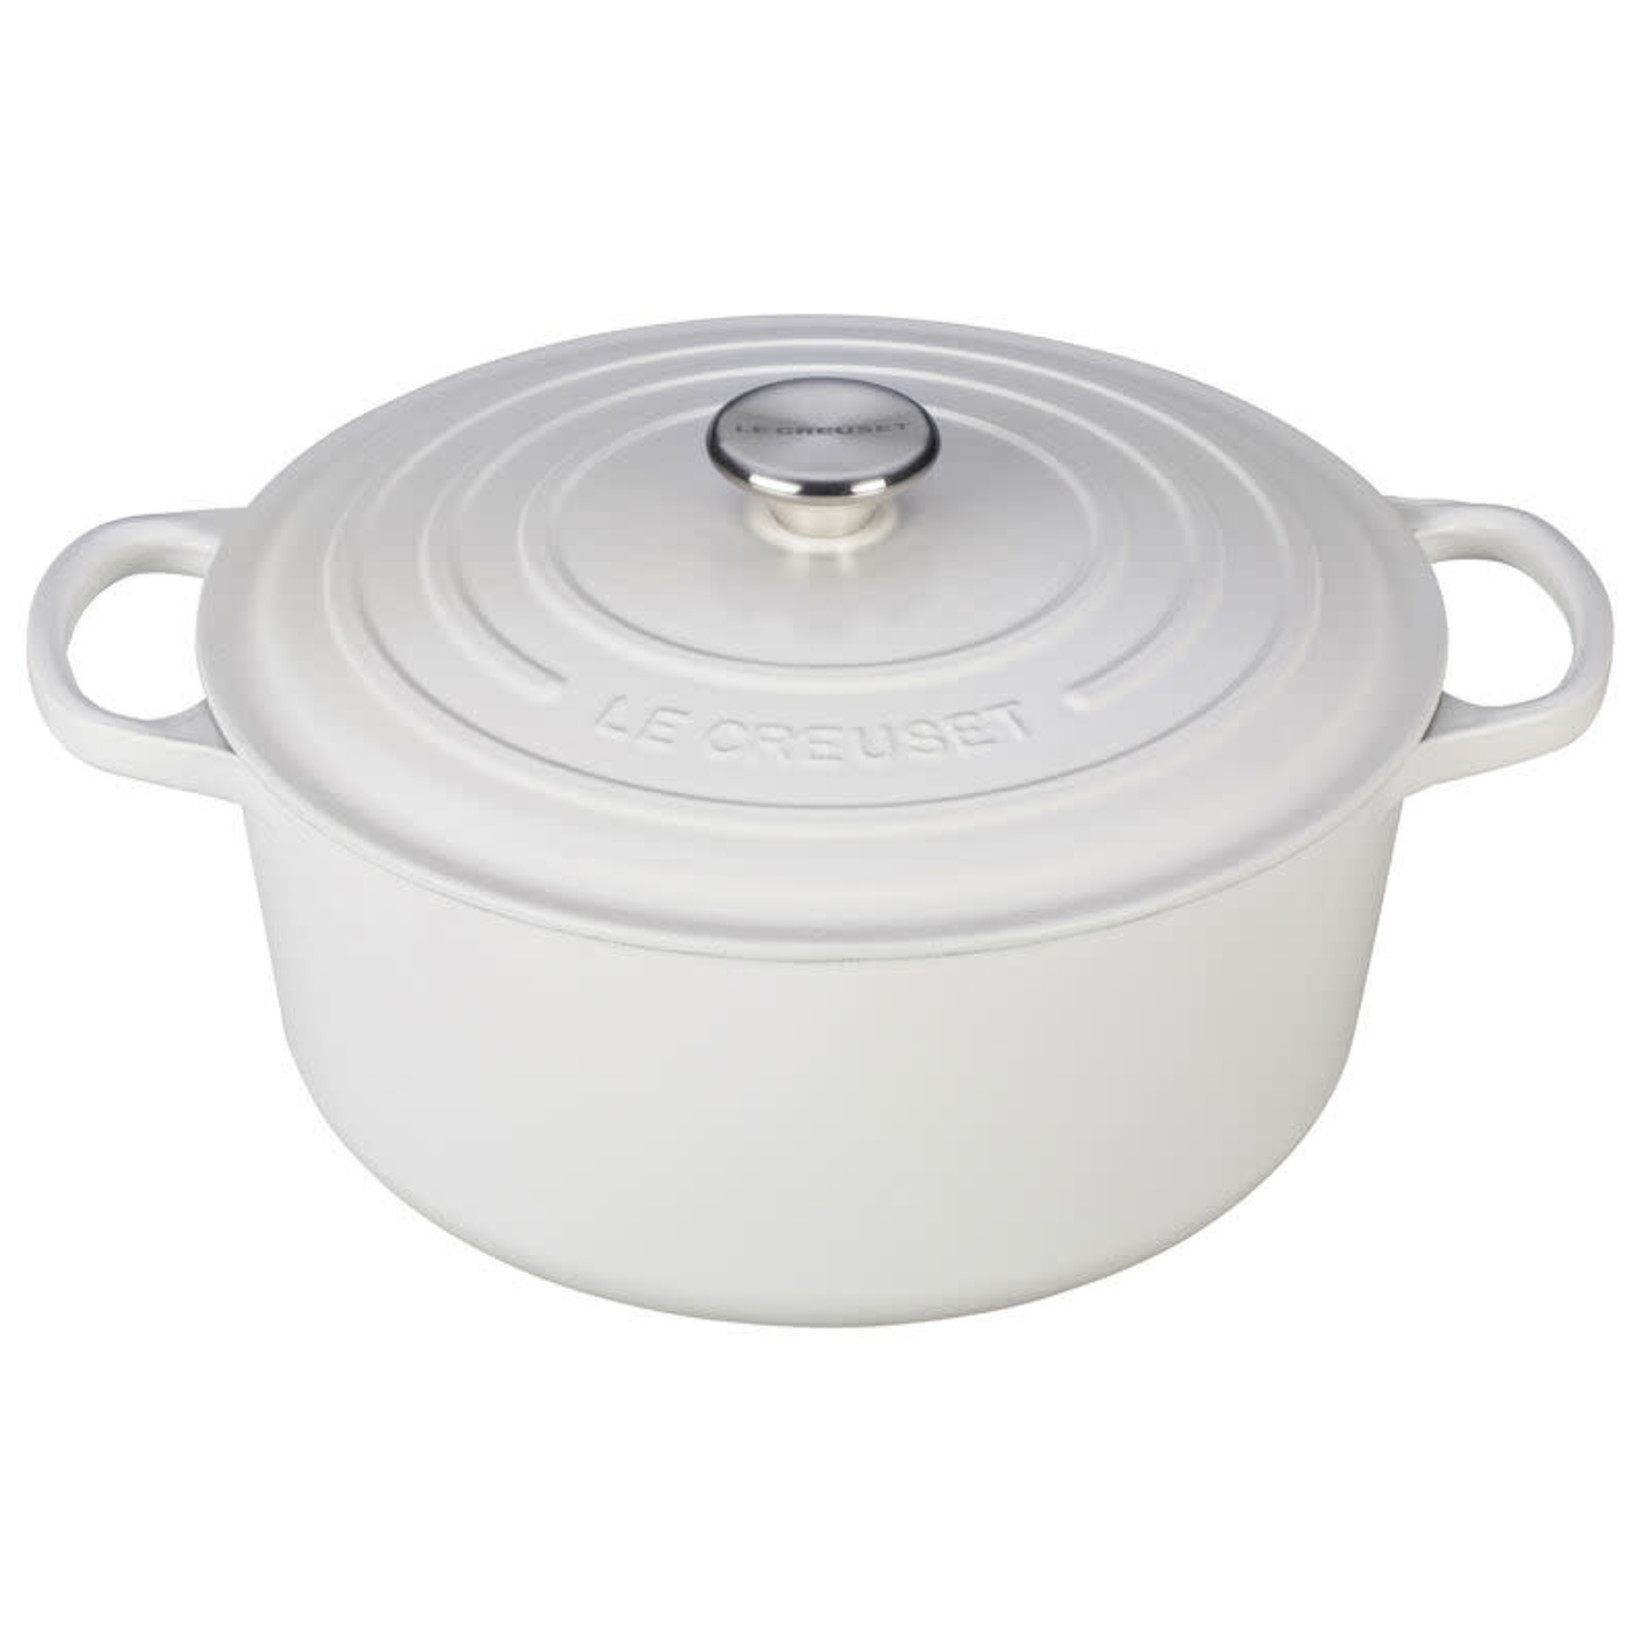 LE CREUSET LE CREUSET Round French Oven 4.2L